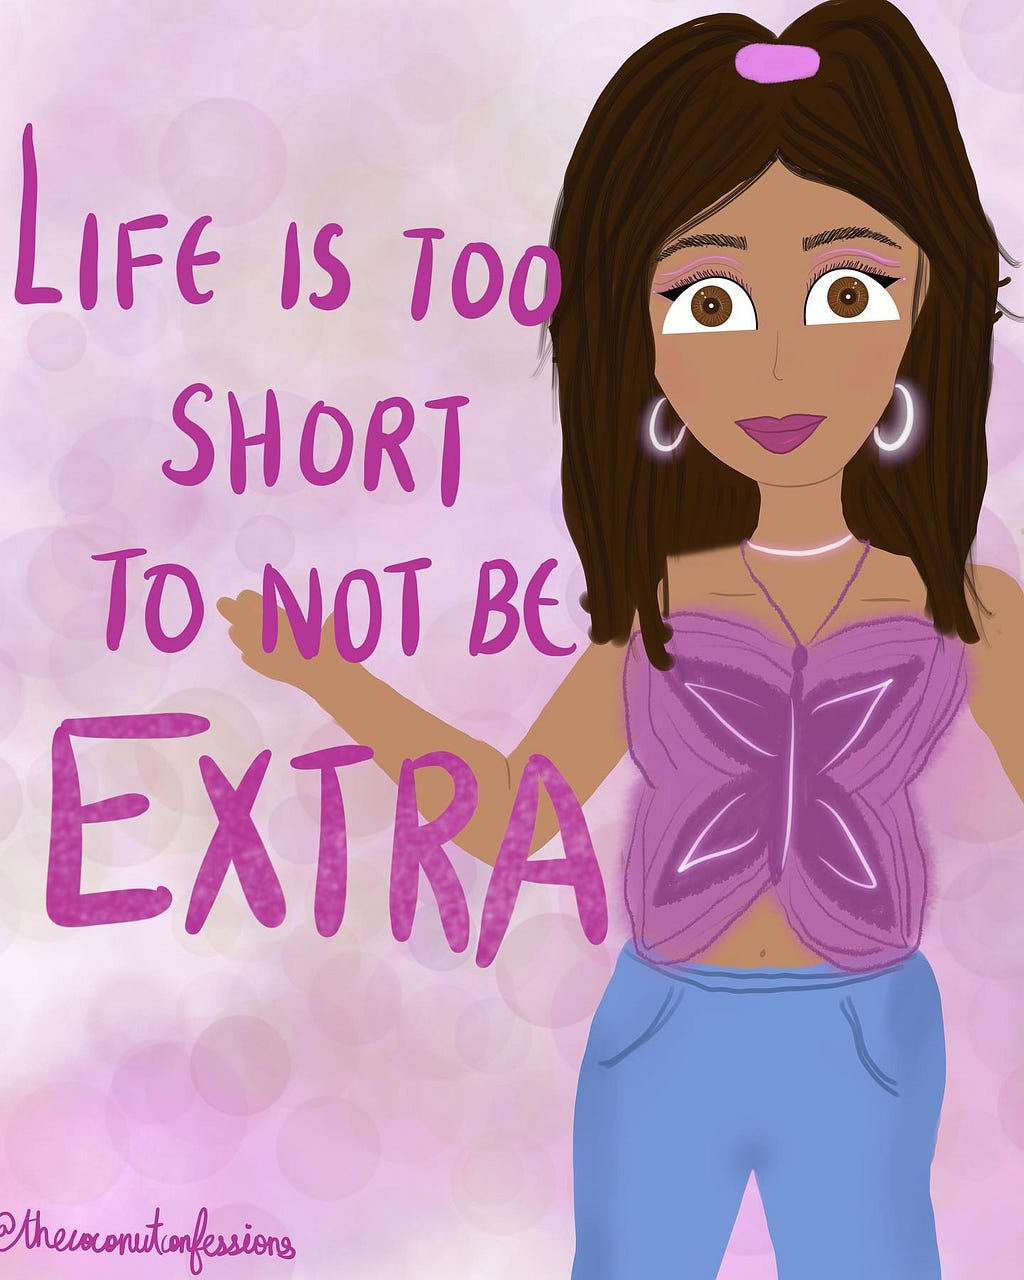 A cartoon girl with purple text that says ‘Life is too short to not be extra’.